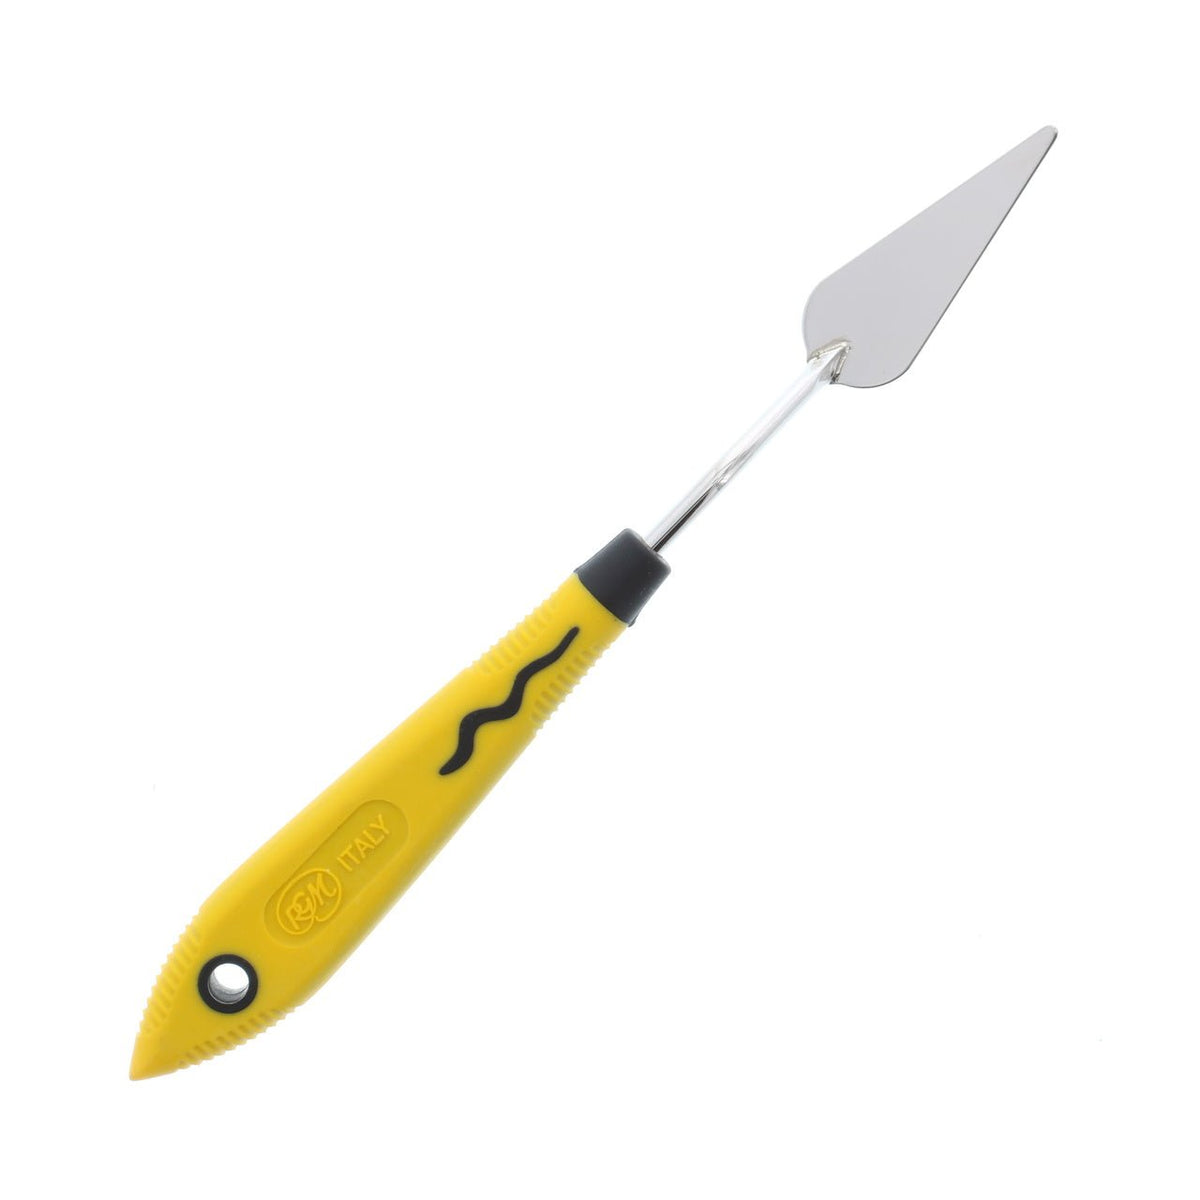 RGM Soft Grip Painting Knife #022 (Yellow Handle) - merriartist.com